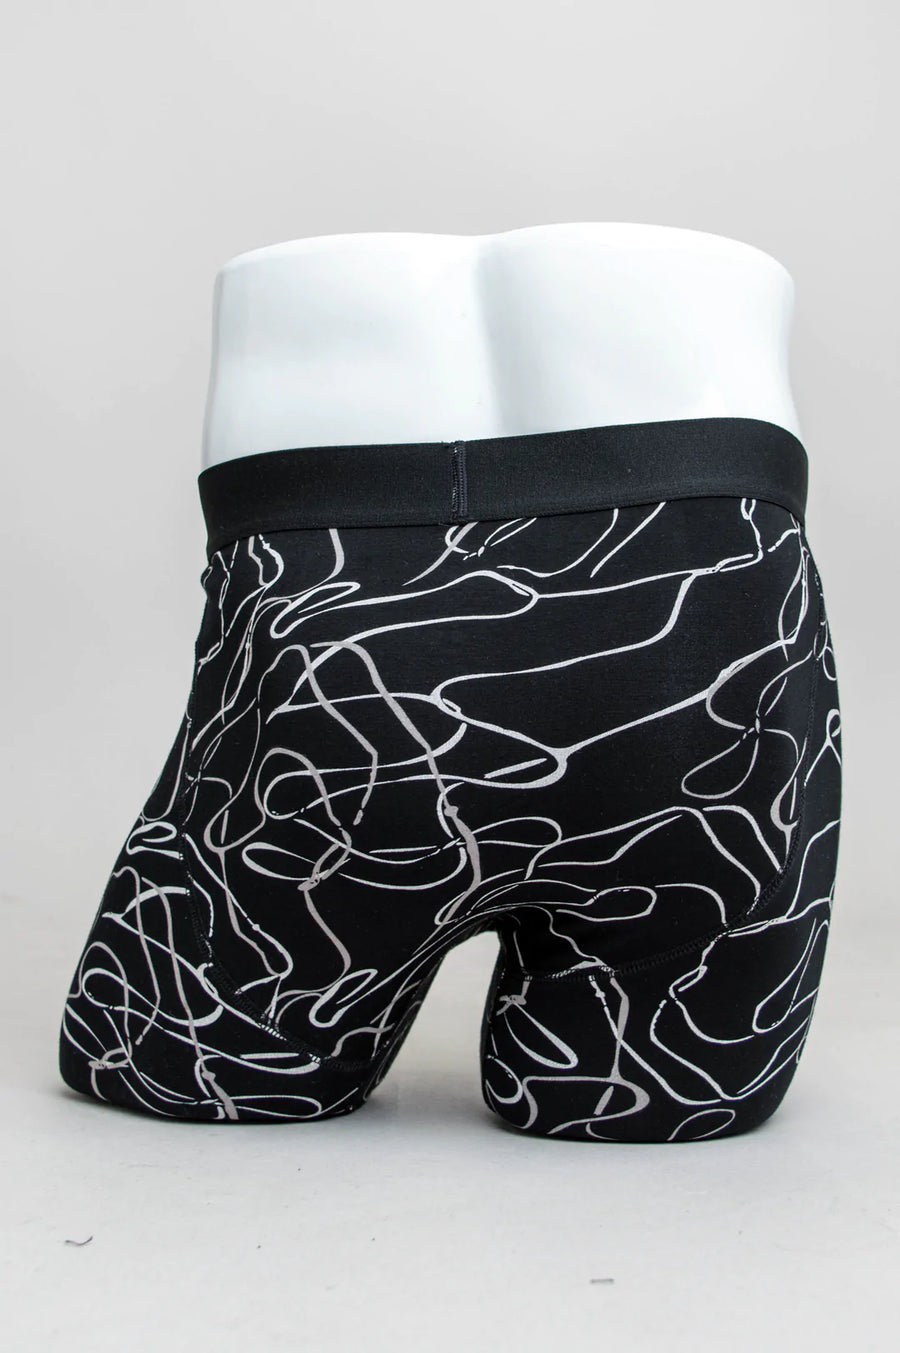 Middle Man Boxers/Underwear - Art Expo